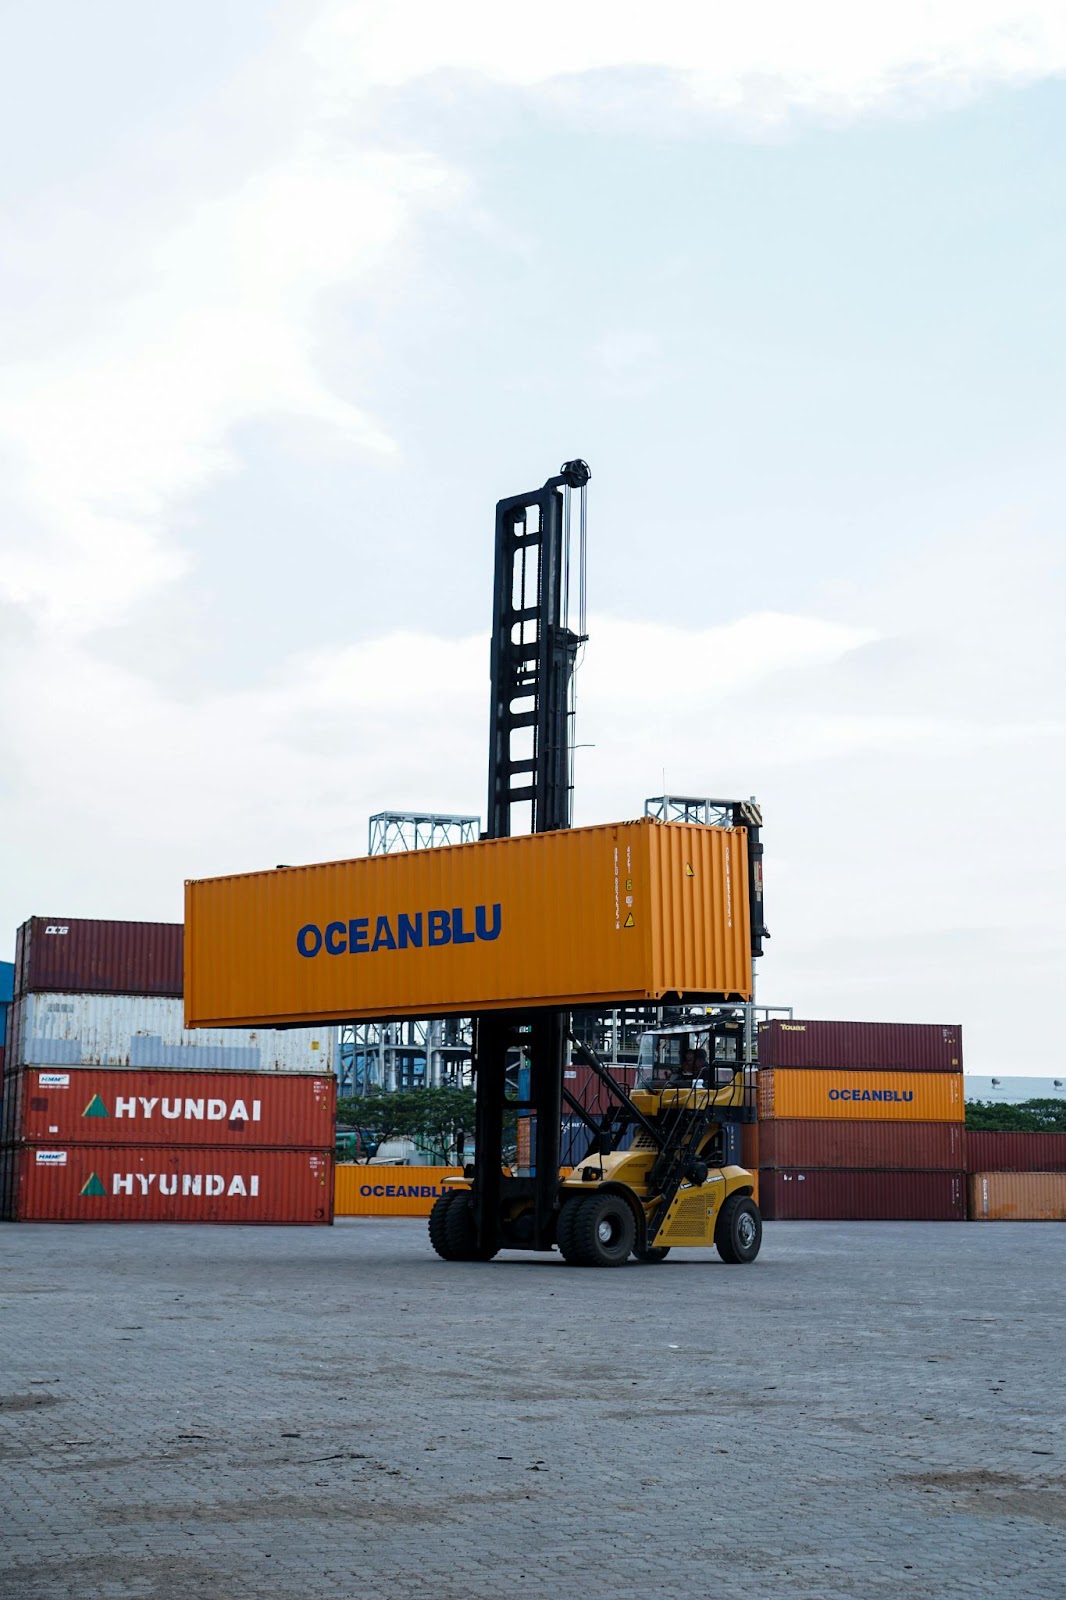 An industrial-sized forklift carrying a freight shipping crate